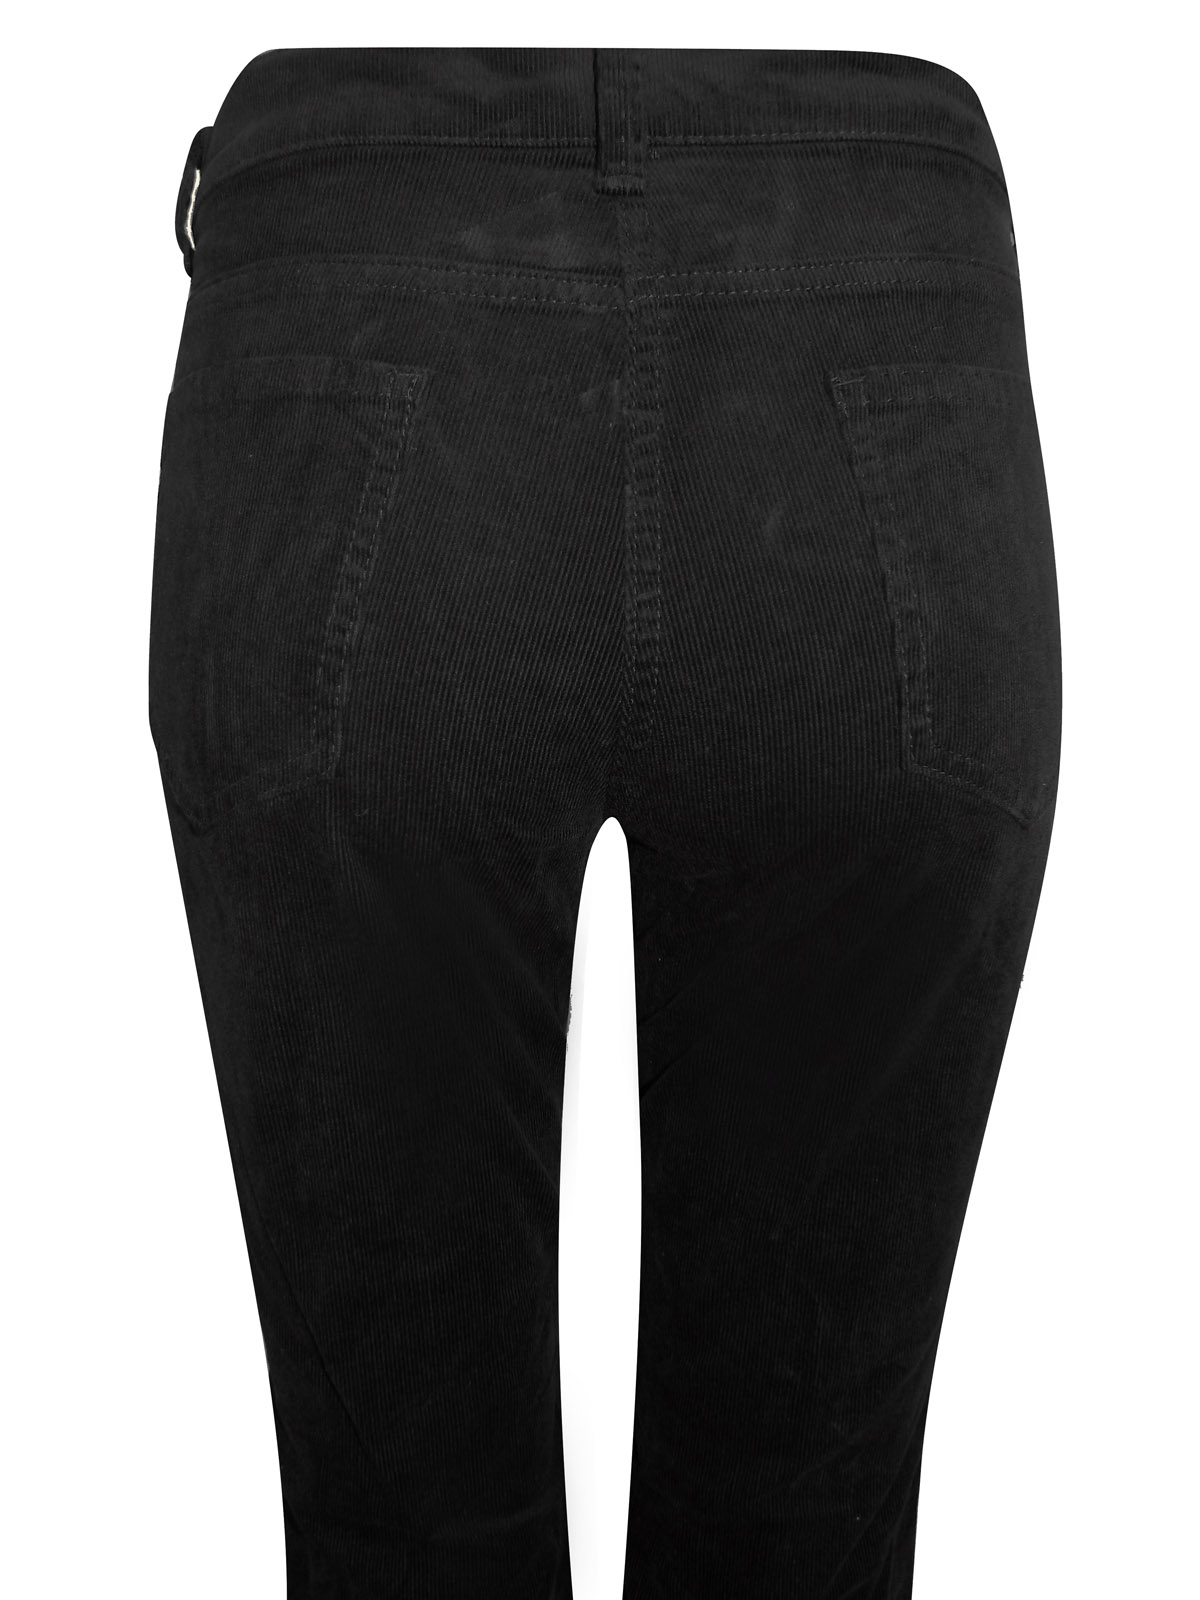 Marks and Spencer - - M&S BLACK Cotton Rich Bootcut Fine Cord Trousers ...